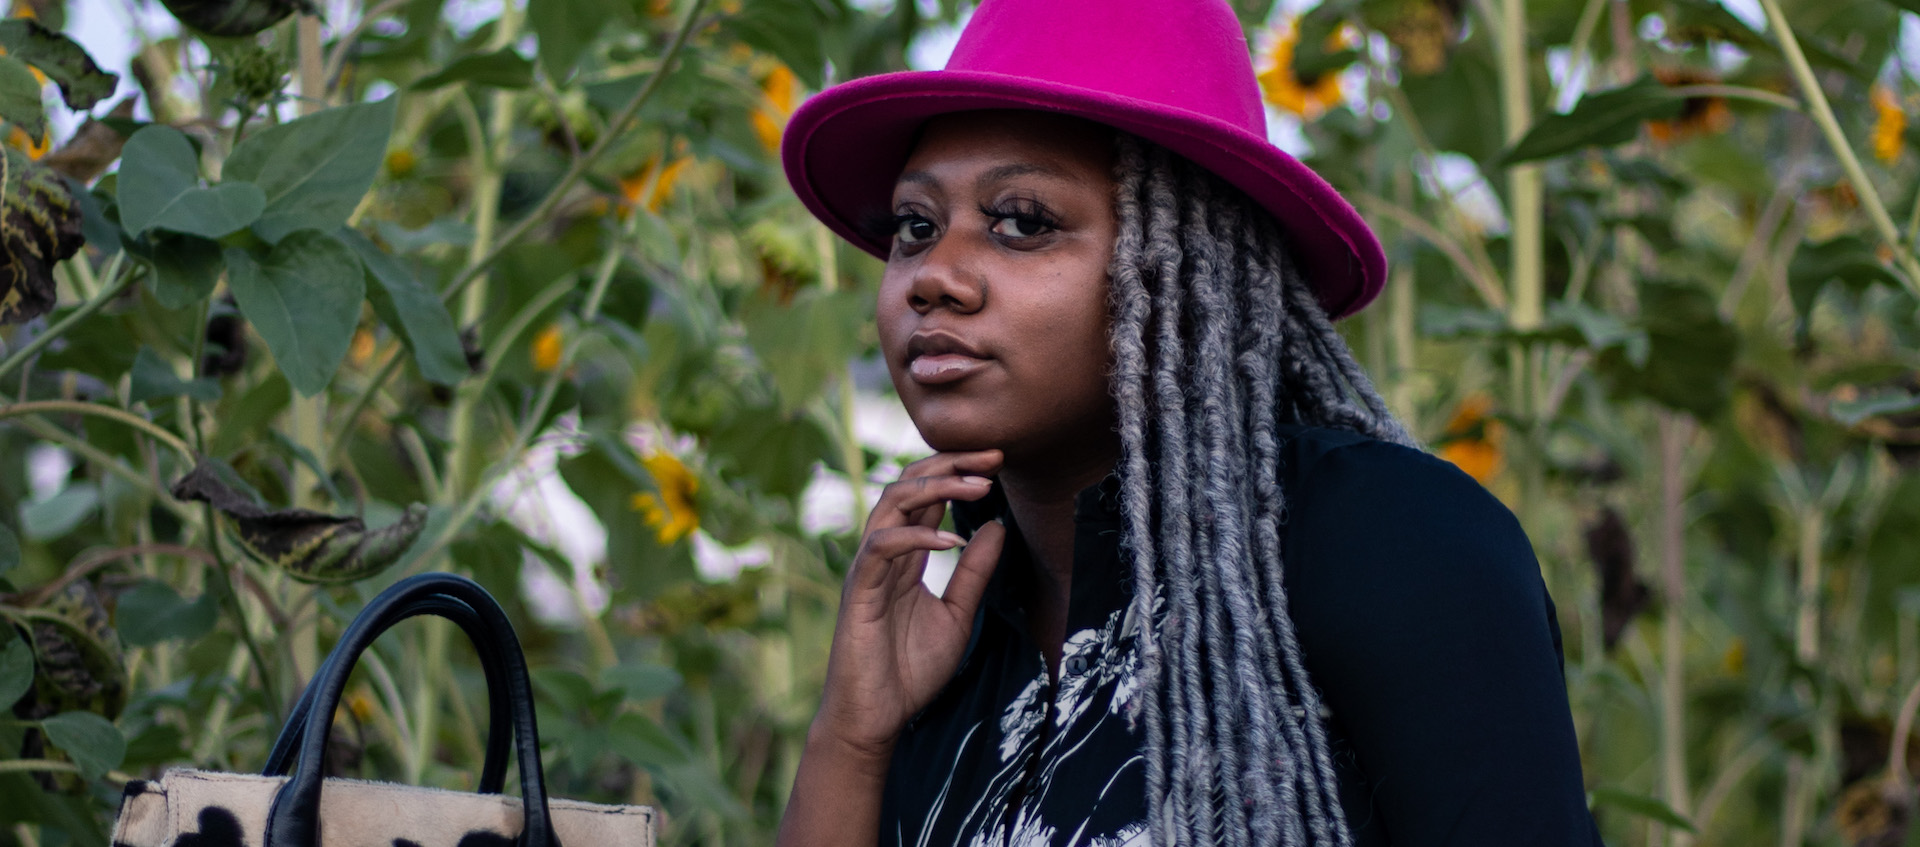 Artist Deijah Archie-Davis stands outside in a bright pink fedora in front of a field of sunflowers